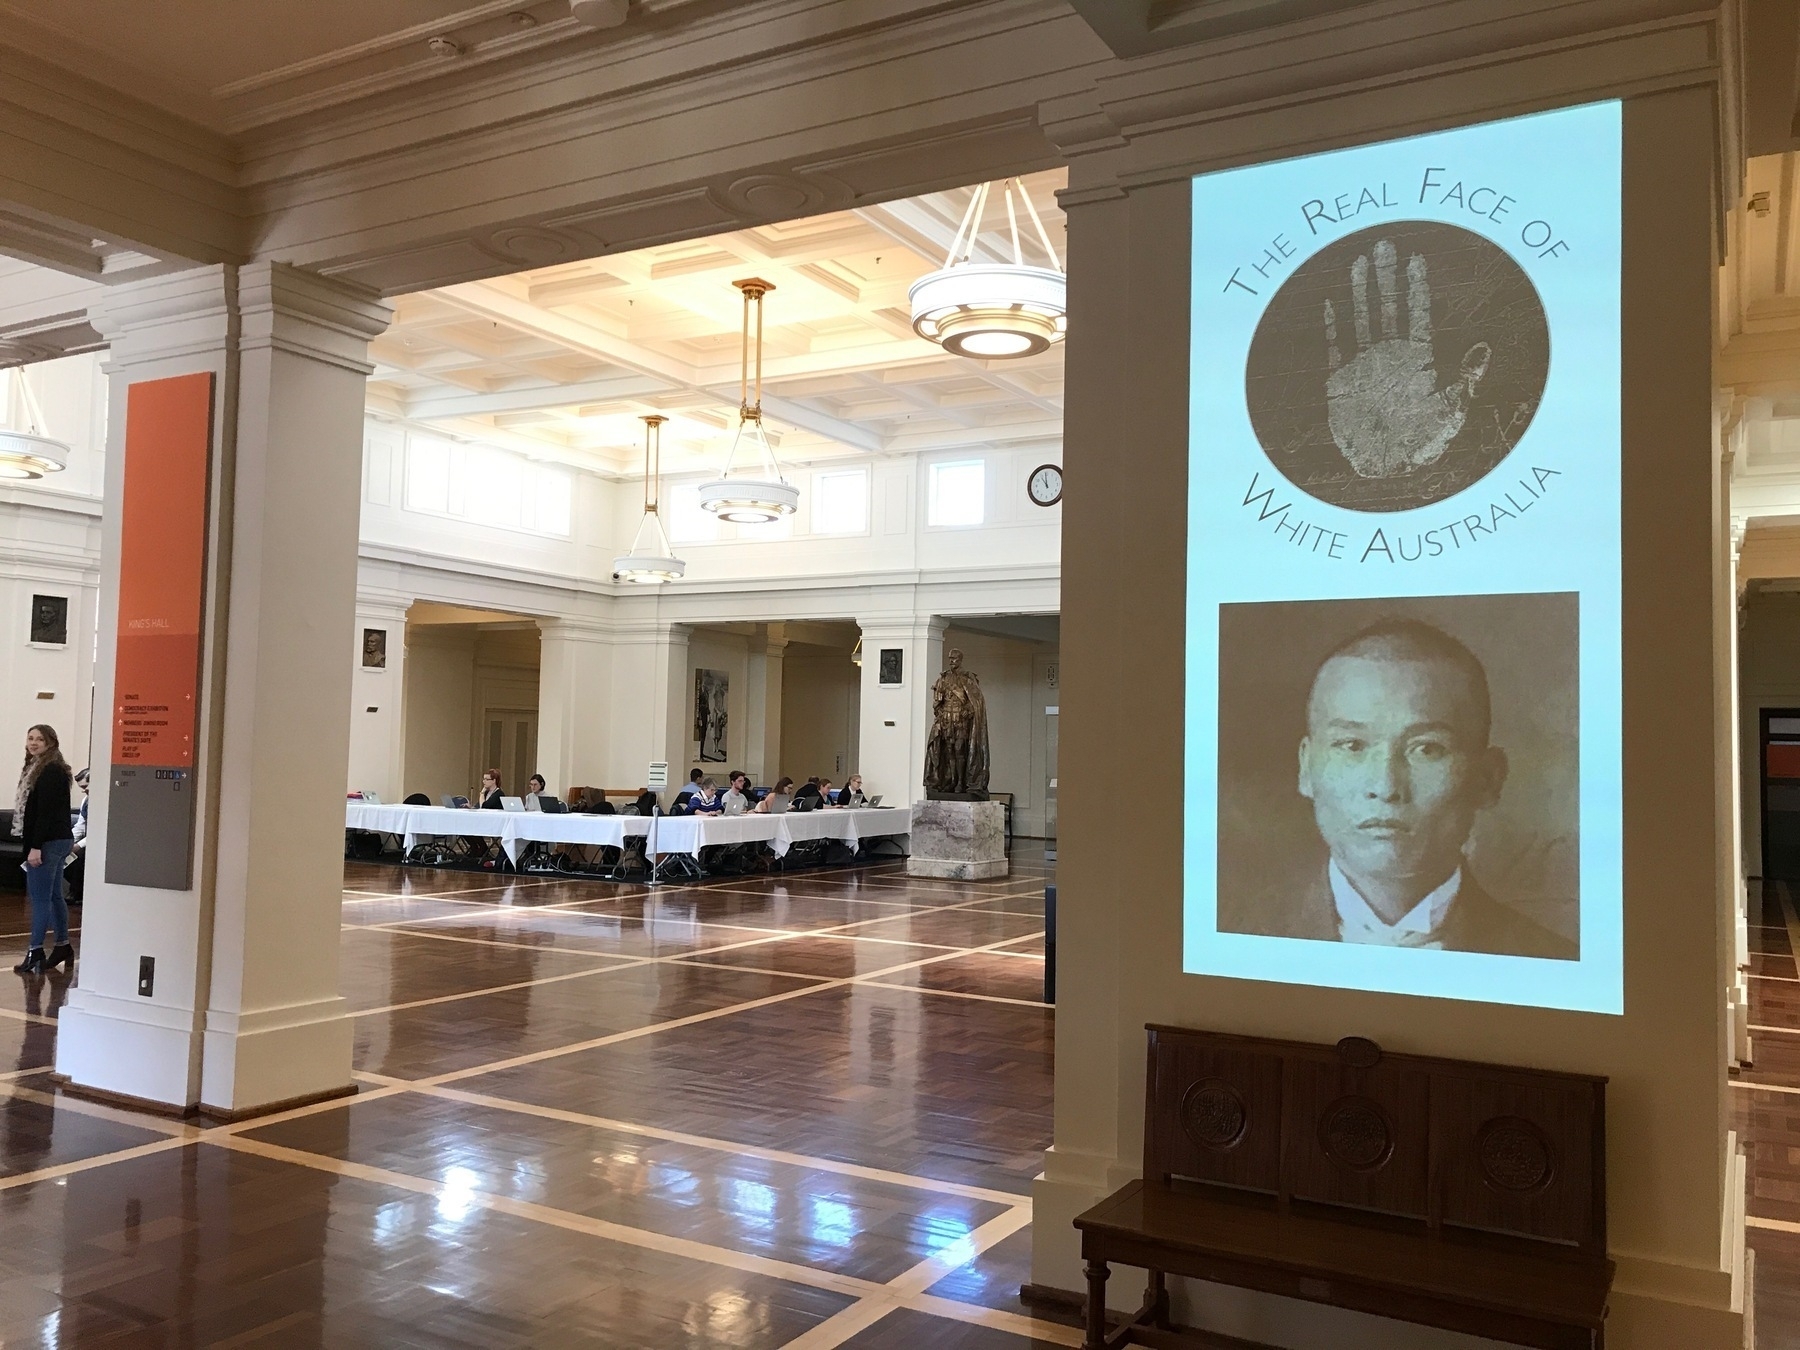 Photograph of Kings Hall in Old Parliament House. In the foreground, the Real Face of White Australia logo, and a portrait photo from one of the records, is projected on a column. In the background are tables where volunteers are busily transcribing records.